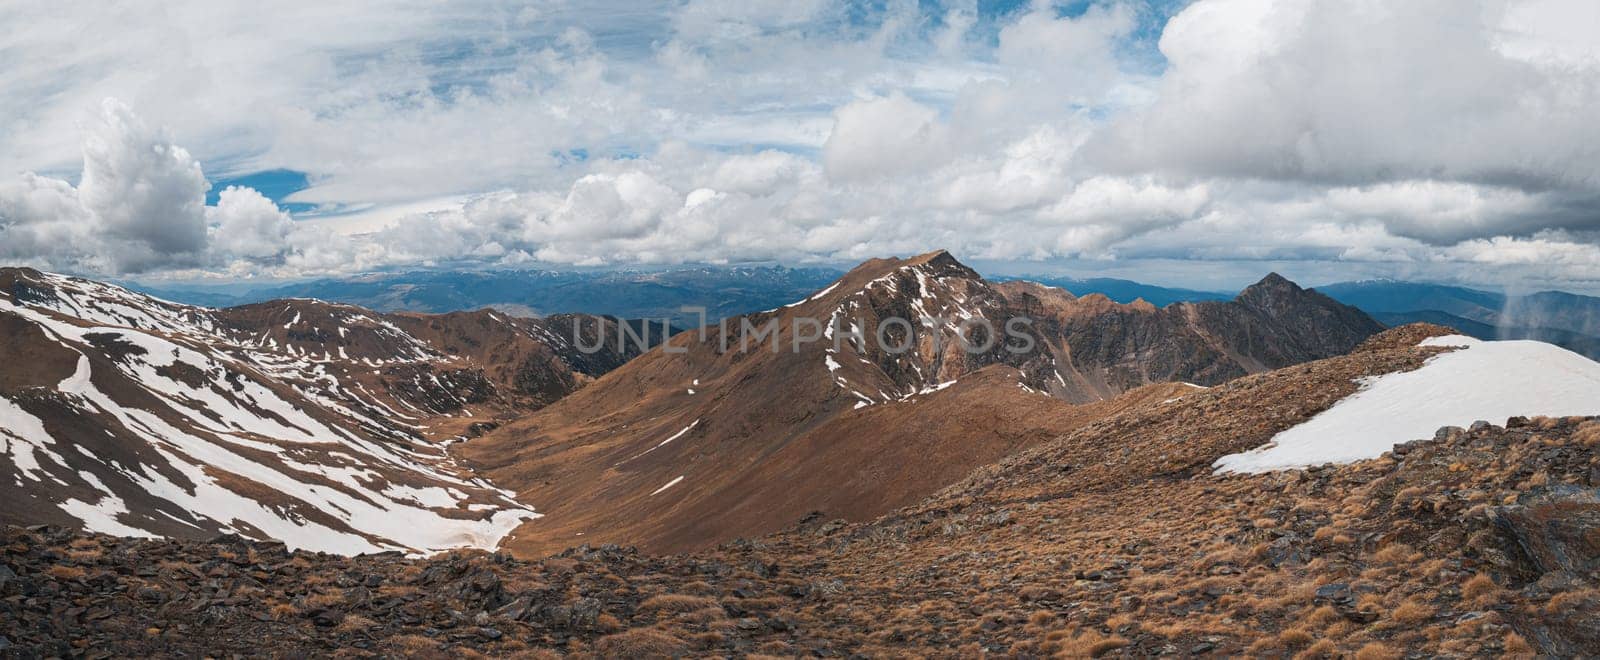 Panoramic delightful view of the steep snowy slopes on a cloudy day in the Pyrenees mountains on the sky. Concept of south european mountain nature. Copyspace.